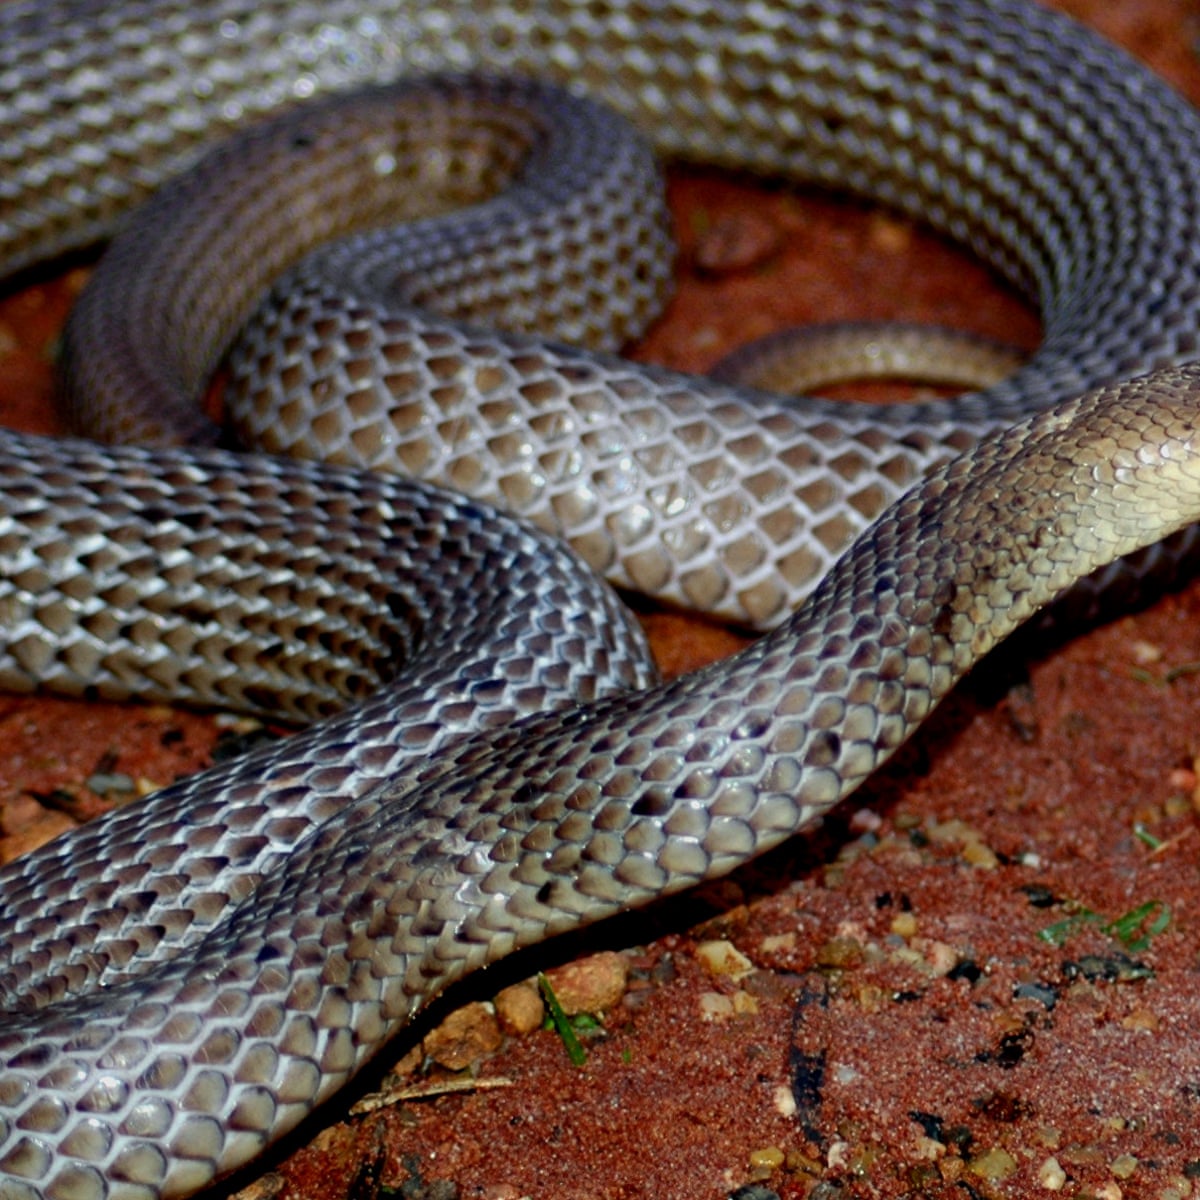 More than half Australian snake bite deaths since 2000 occurred at victim's  home | Snakes | The Guardian